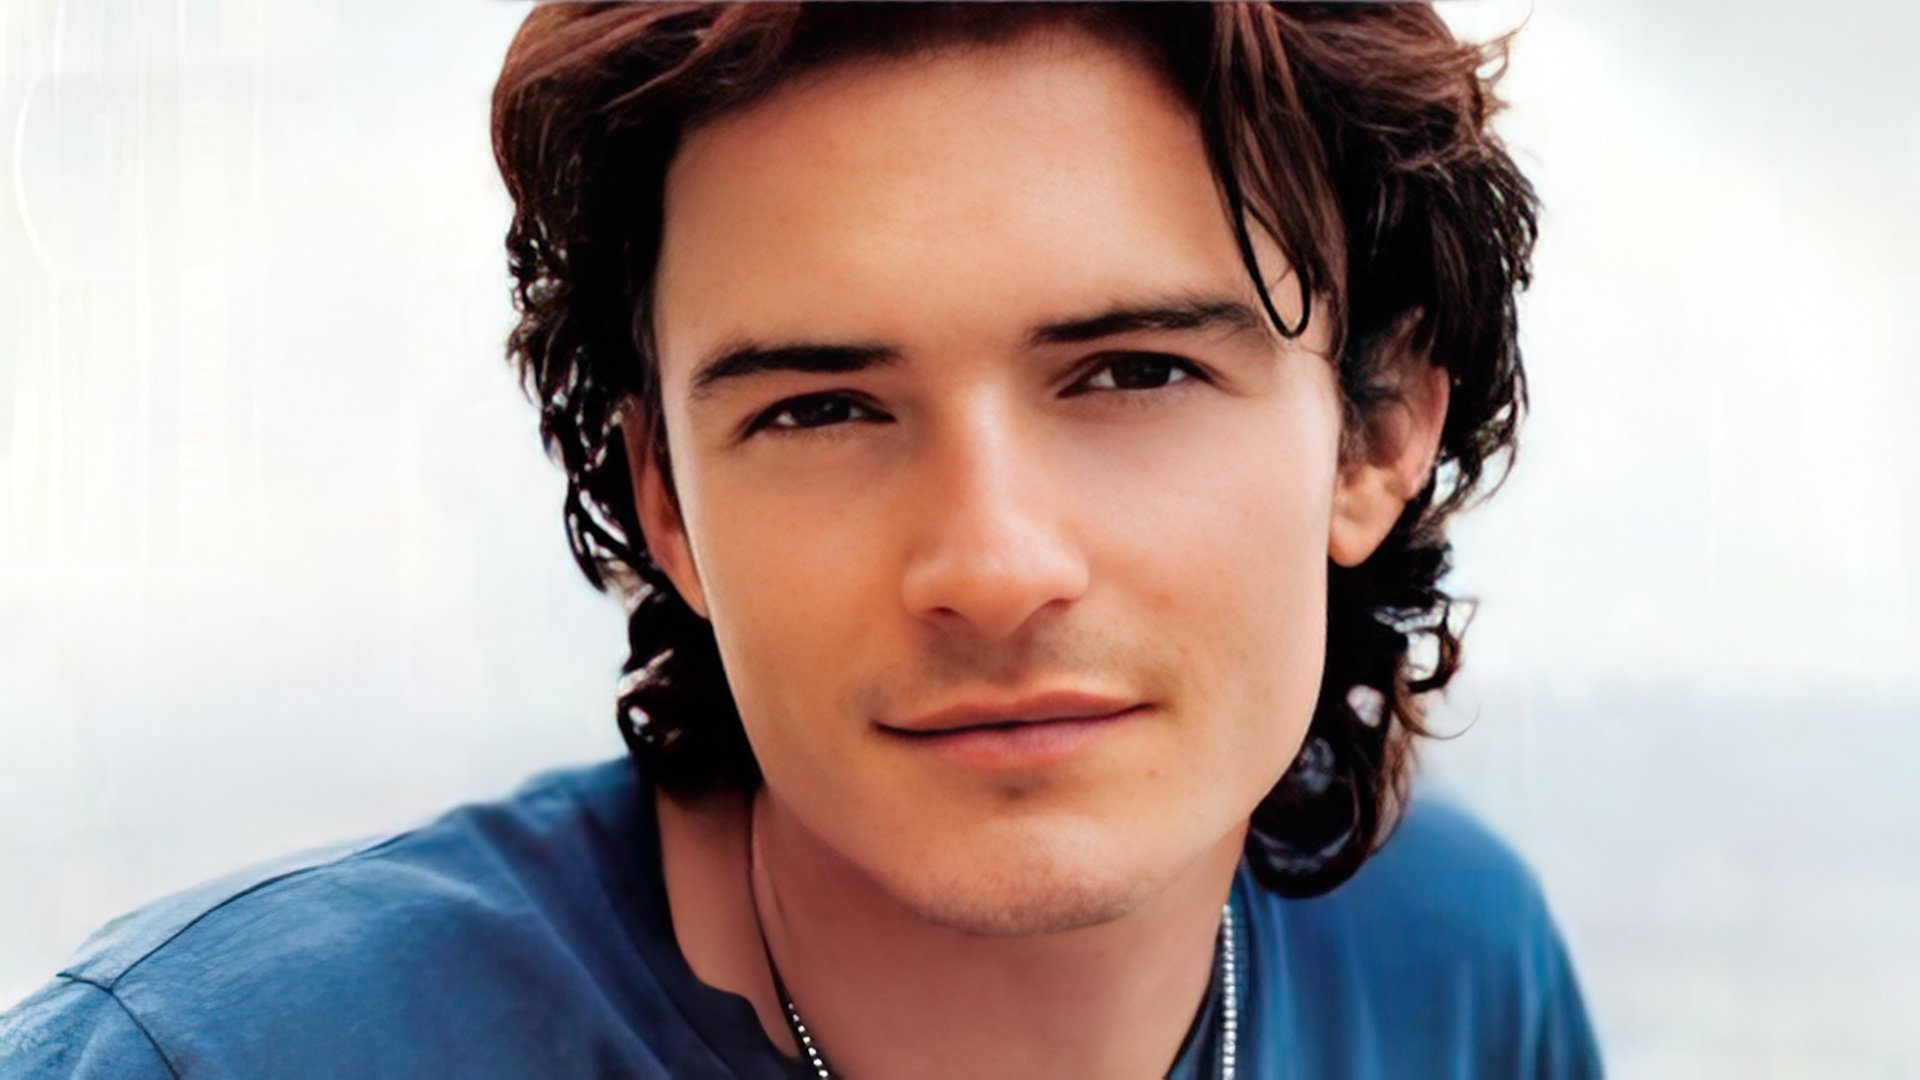 It was difficult to resist before the young Orlando Bloom